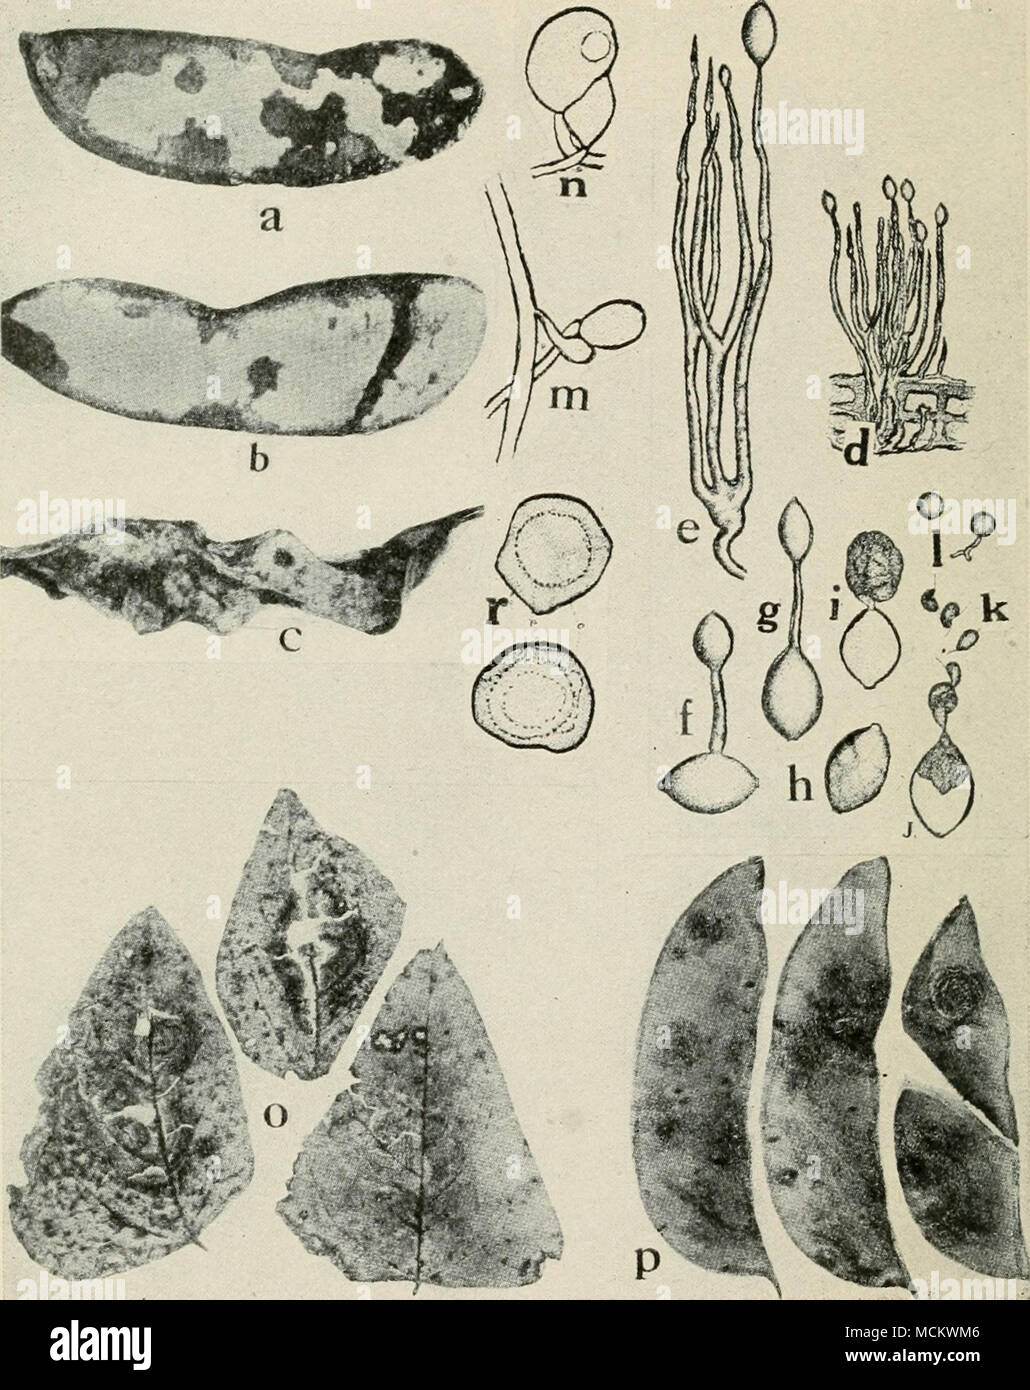 . Fig. 48. Diseases of Lima Bean. a. h. c. different stages of downy mildew on pods, d. tuft of conidiophores and conidia of Phythophthora phaseoli, e. same as d. but greatly enlarged, /. g. conidia germinating by means of a germ tube, h. i. j. k. germination of conidia by means of zoospores, /. germinating zoospores {d. to /. after Thaxter), m. n. fertilization of the oogonium by the antheridium, o. Phoma blight on foliage, p. Phoma blight on pods (o. and p. after Halsted), r. mature oospores of P. phaseoli {a. to c, m. n. and r. after Clinton). Stock Photo